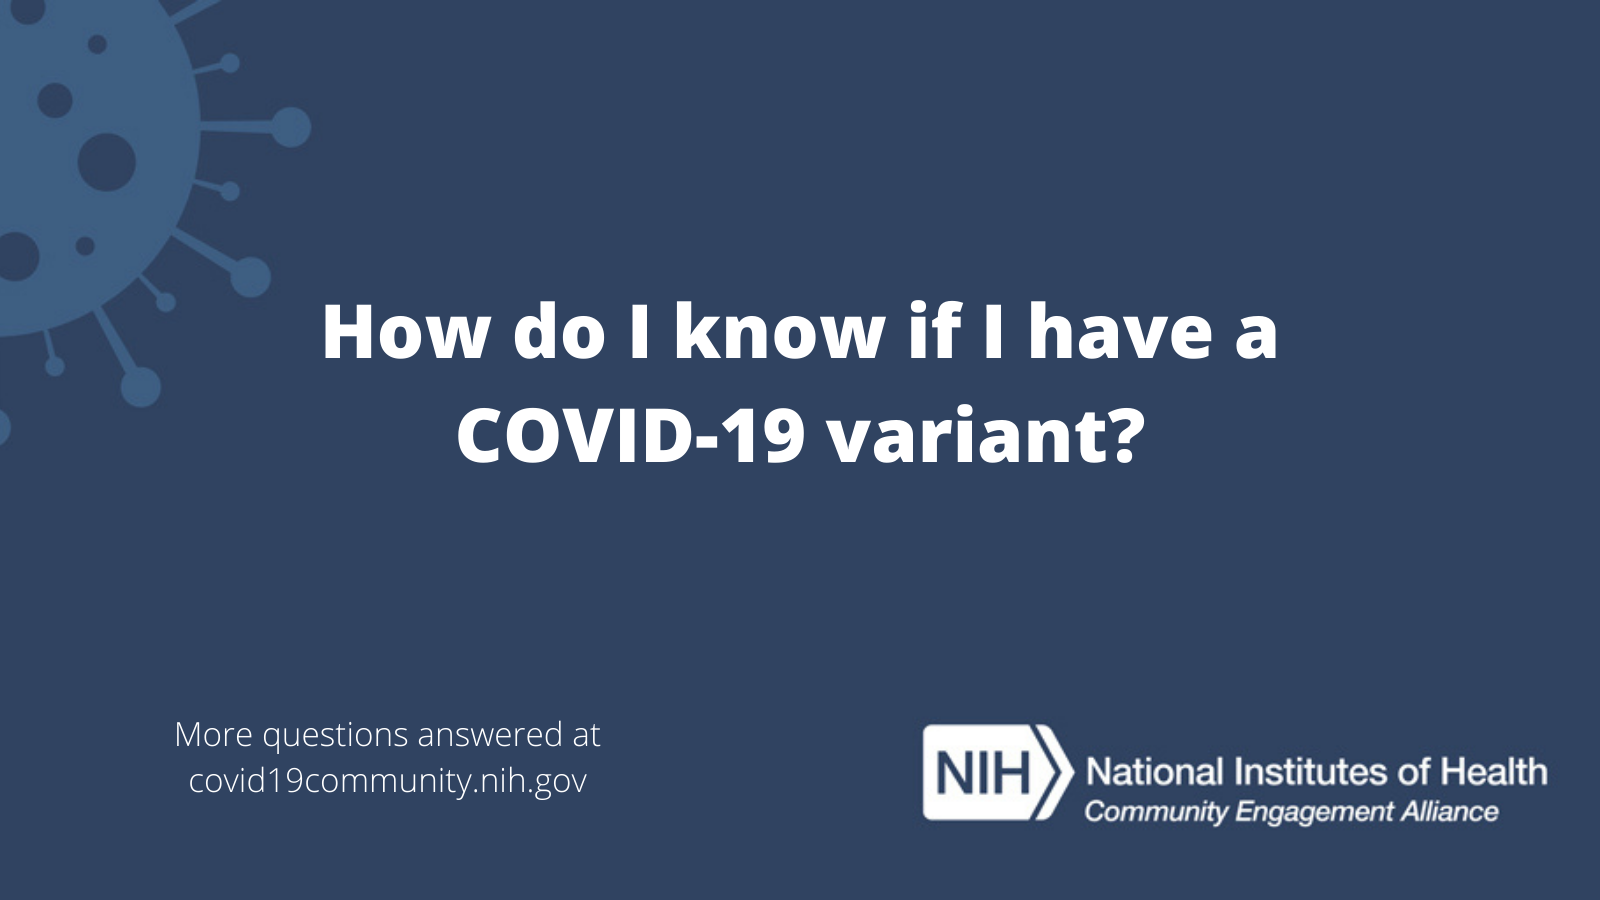 How do I know if I have a COVID-19 variant? More vaccine questions answered at covid19community.nih.gov